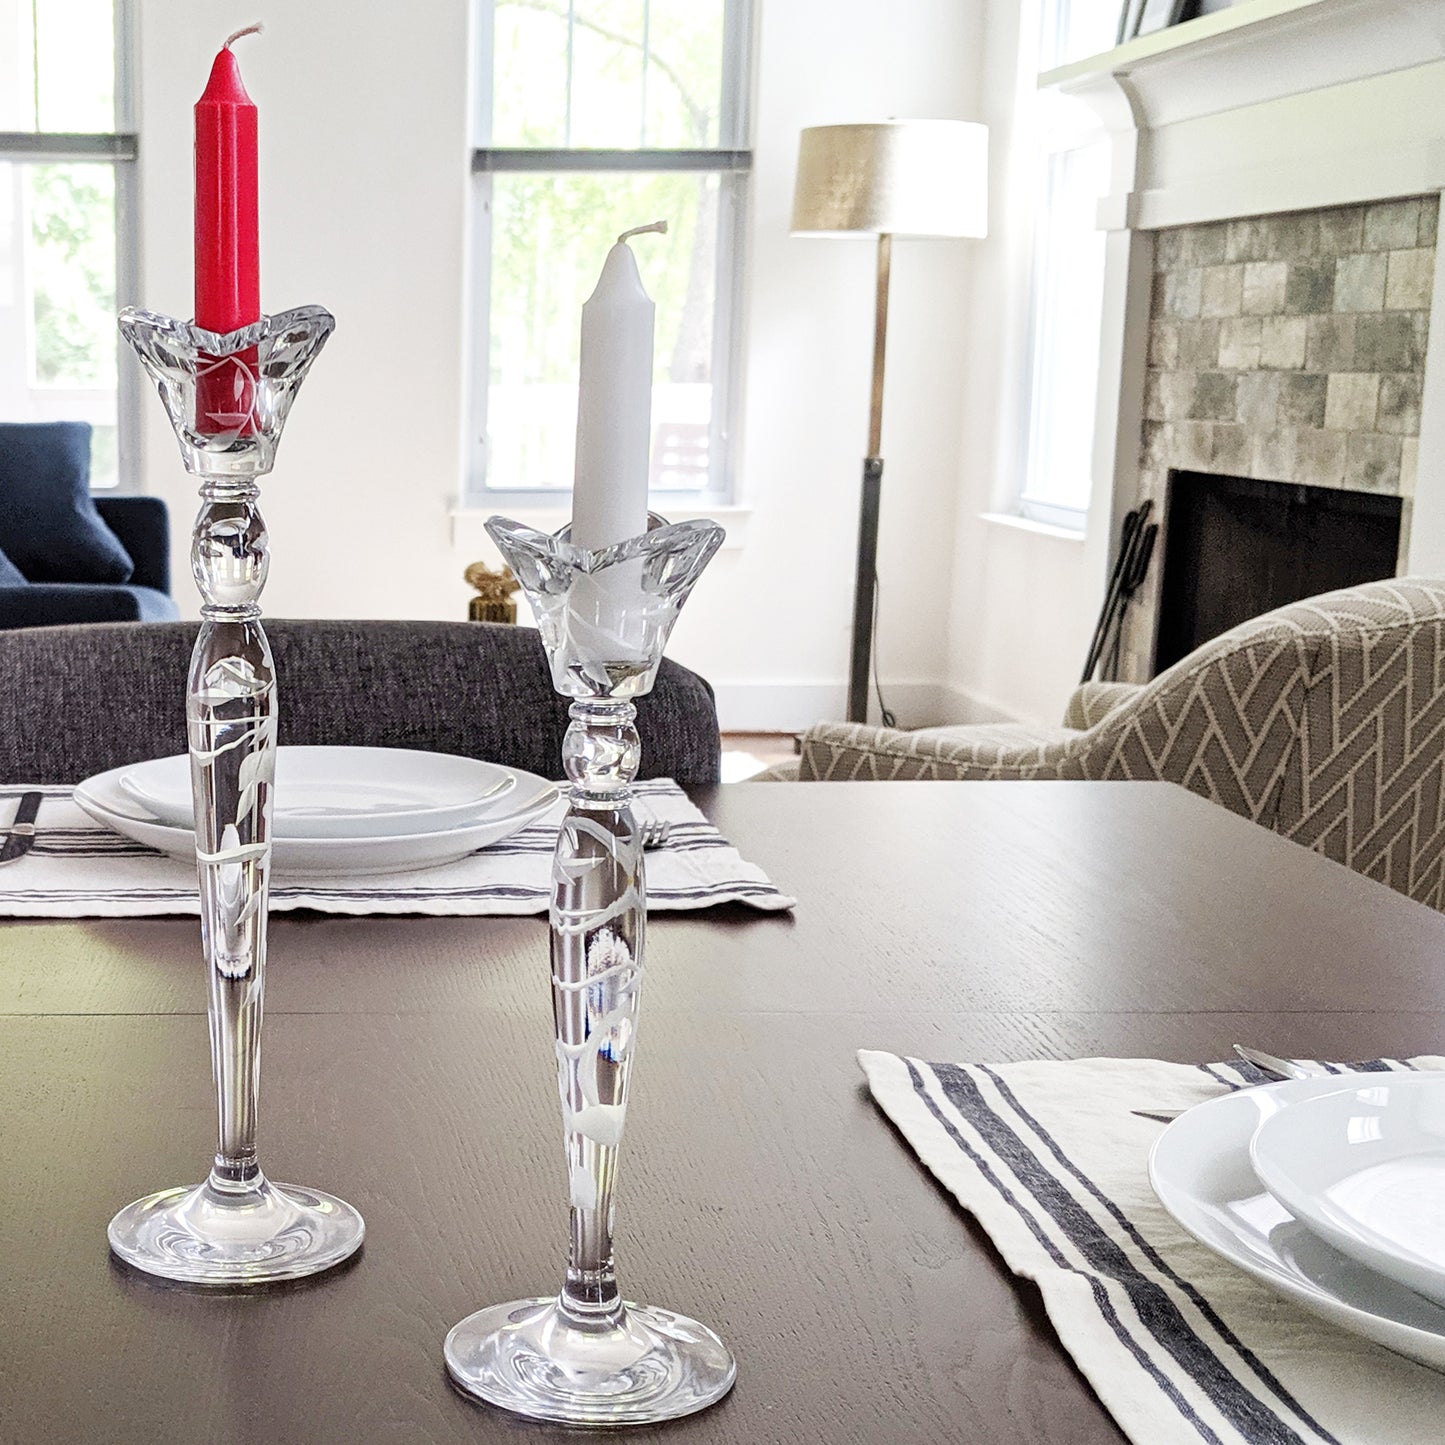 Image, Red and white candles in crystal candle holders, displayed on dinning table.